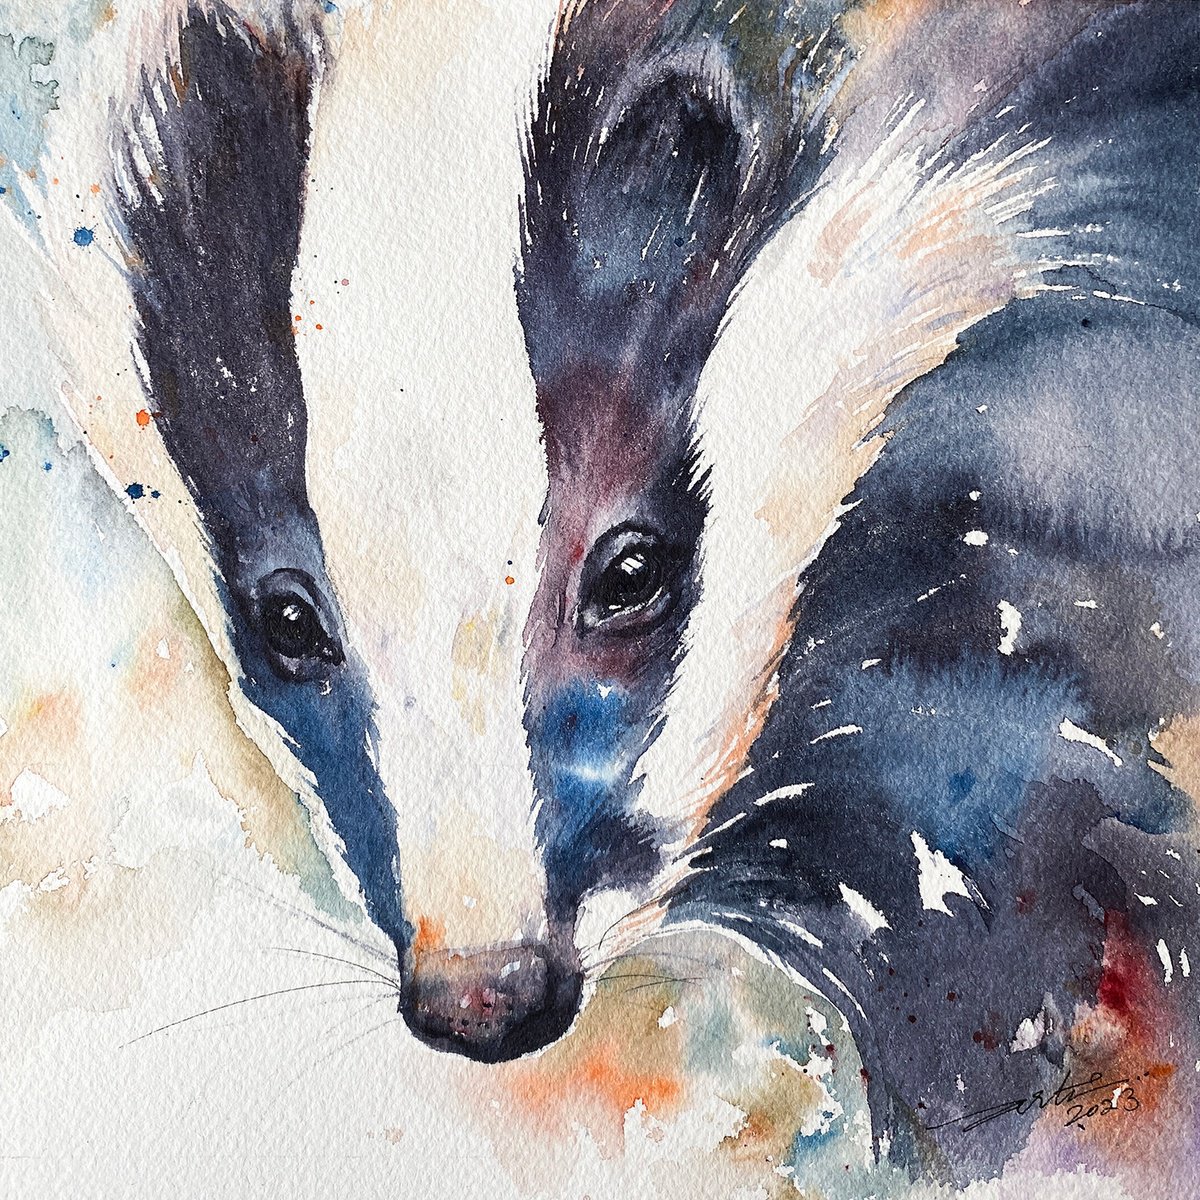 Badger barry by Arti Chauhan